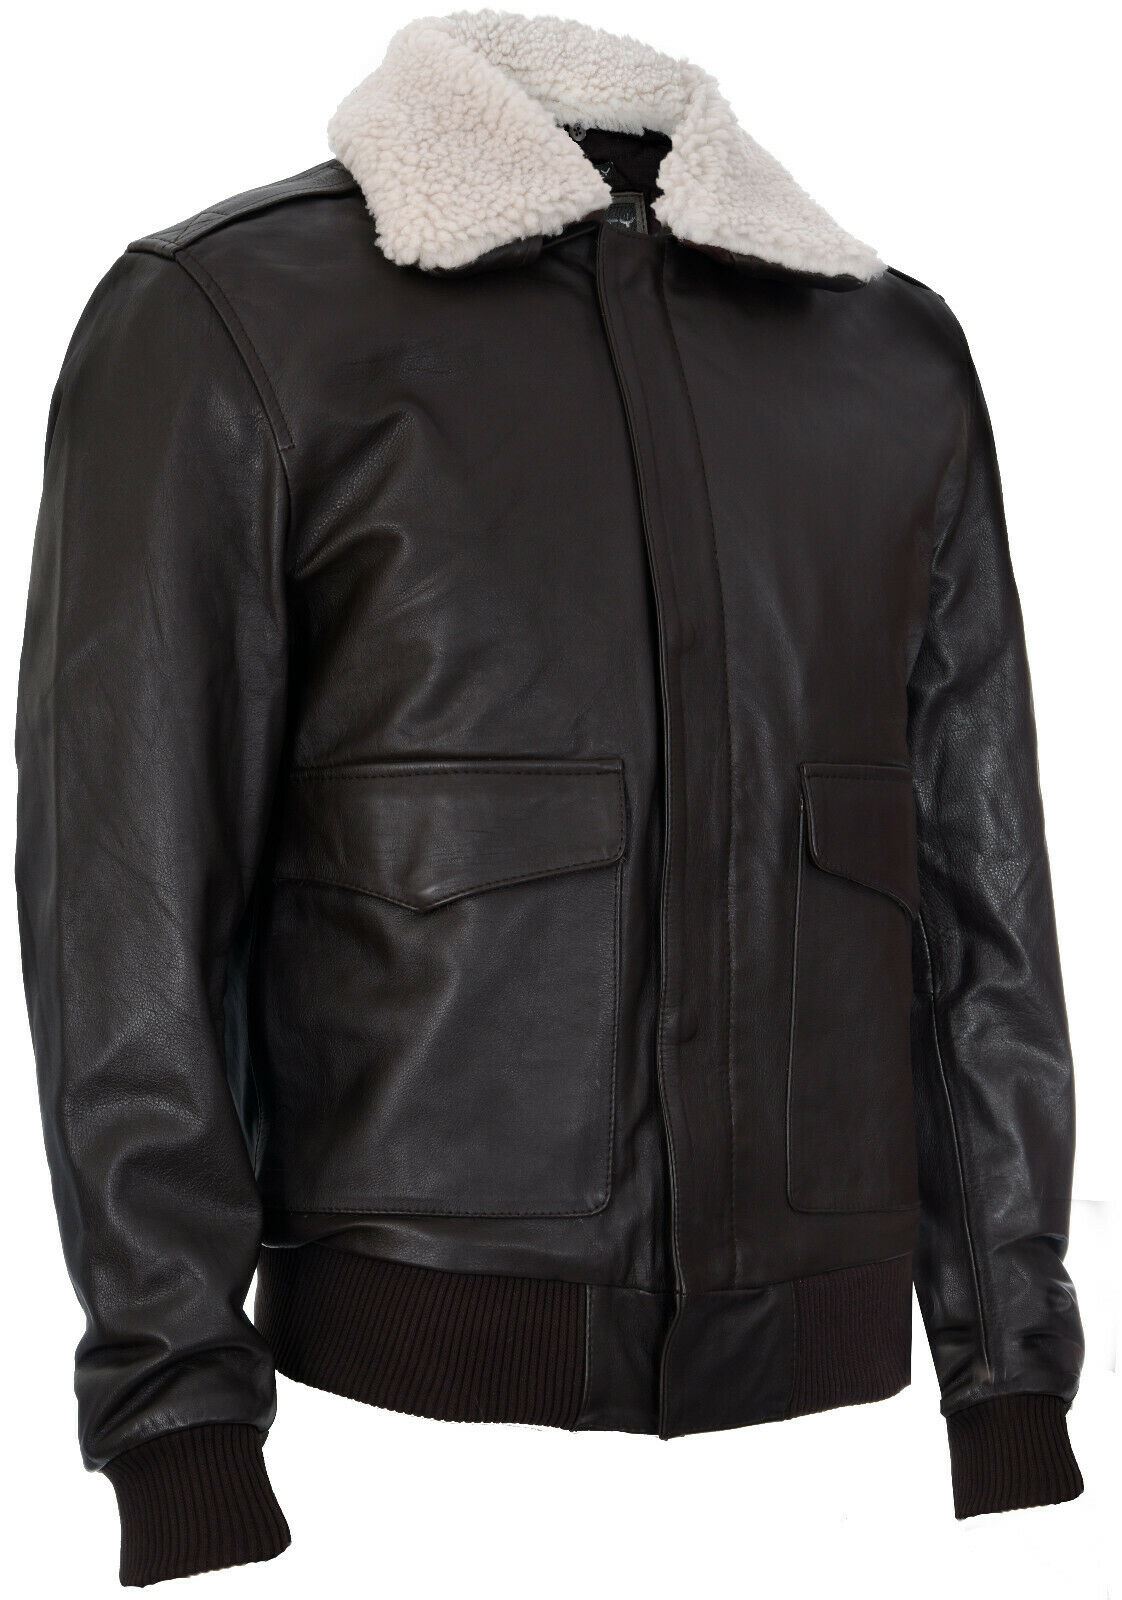 Mens A2 Cowhide Bomber Jacket-Caistor - Upperclass Fashions 